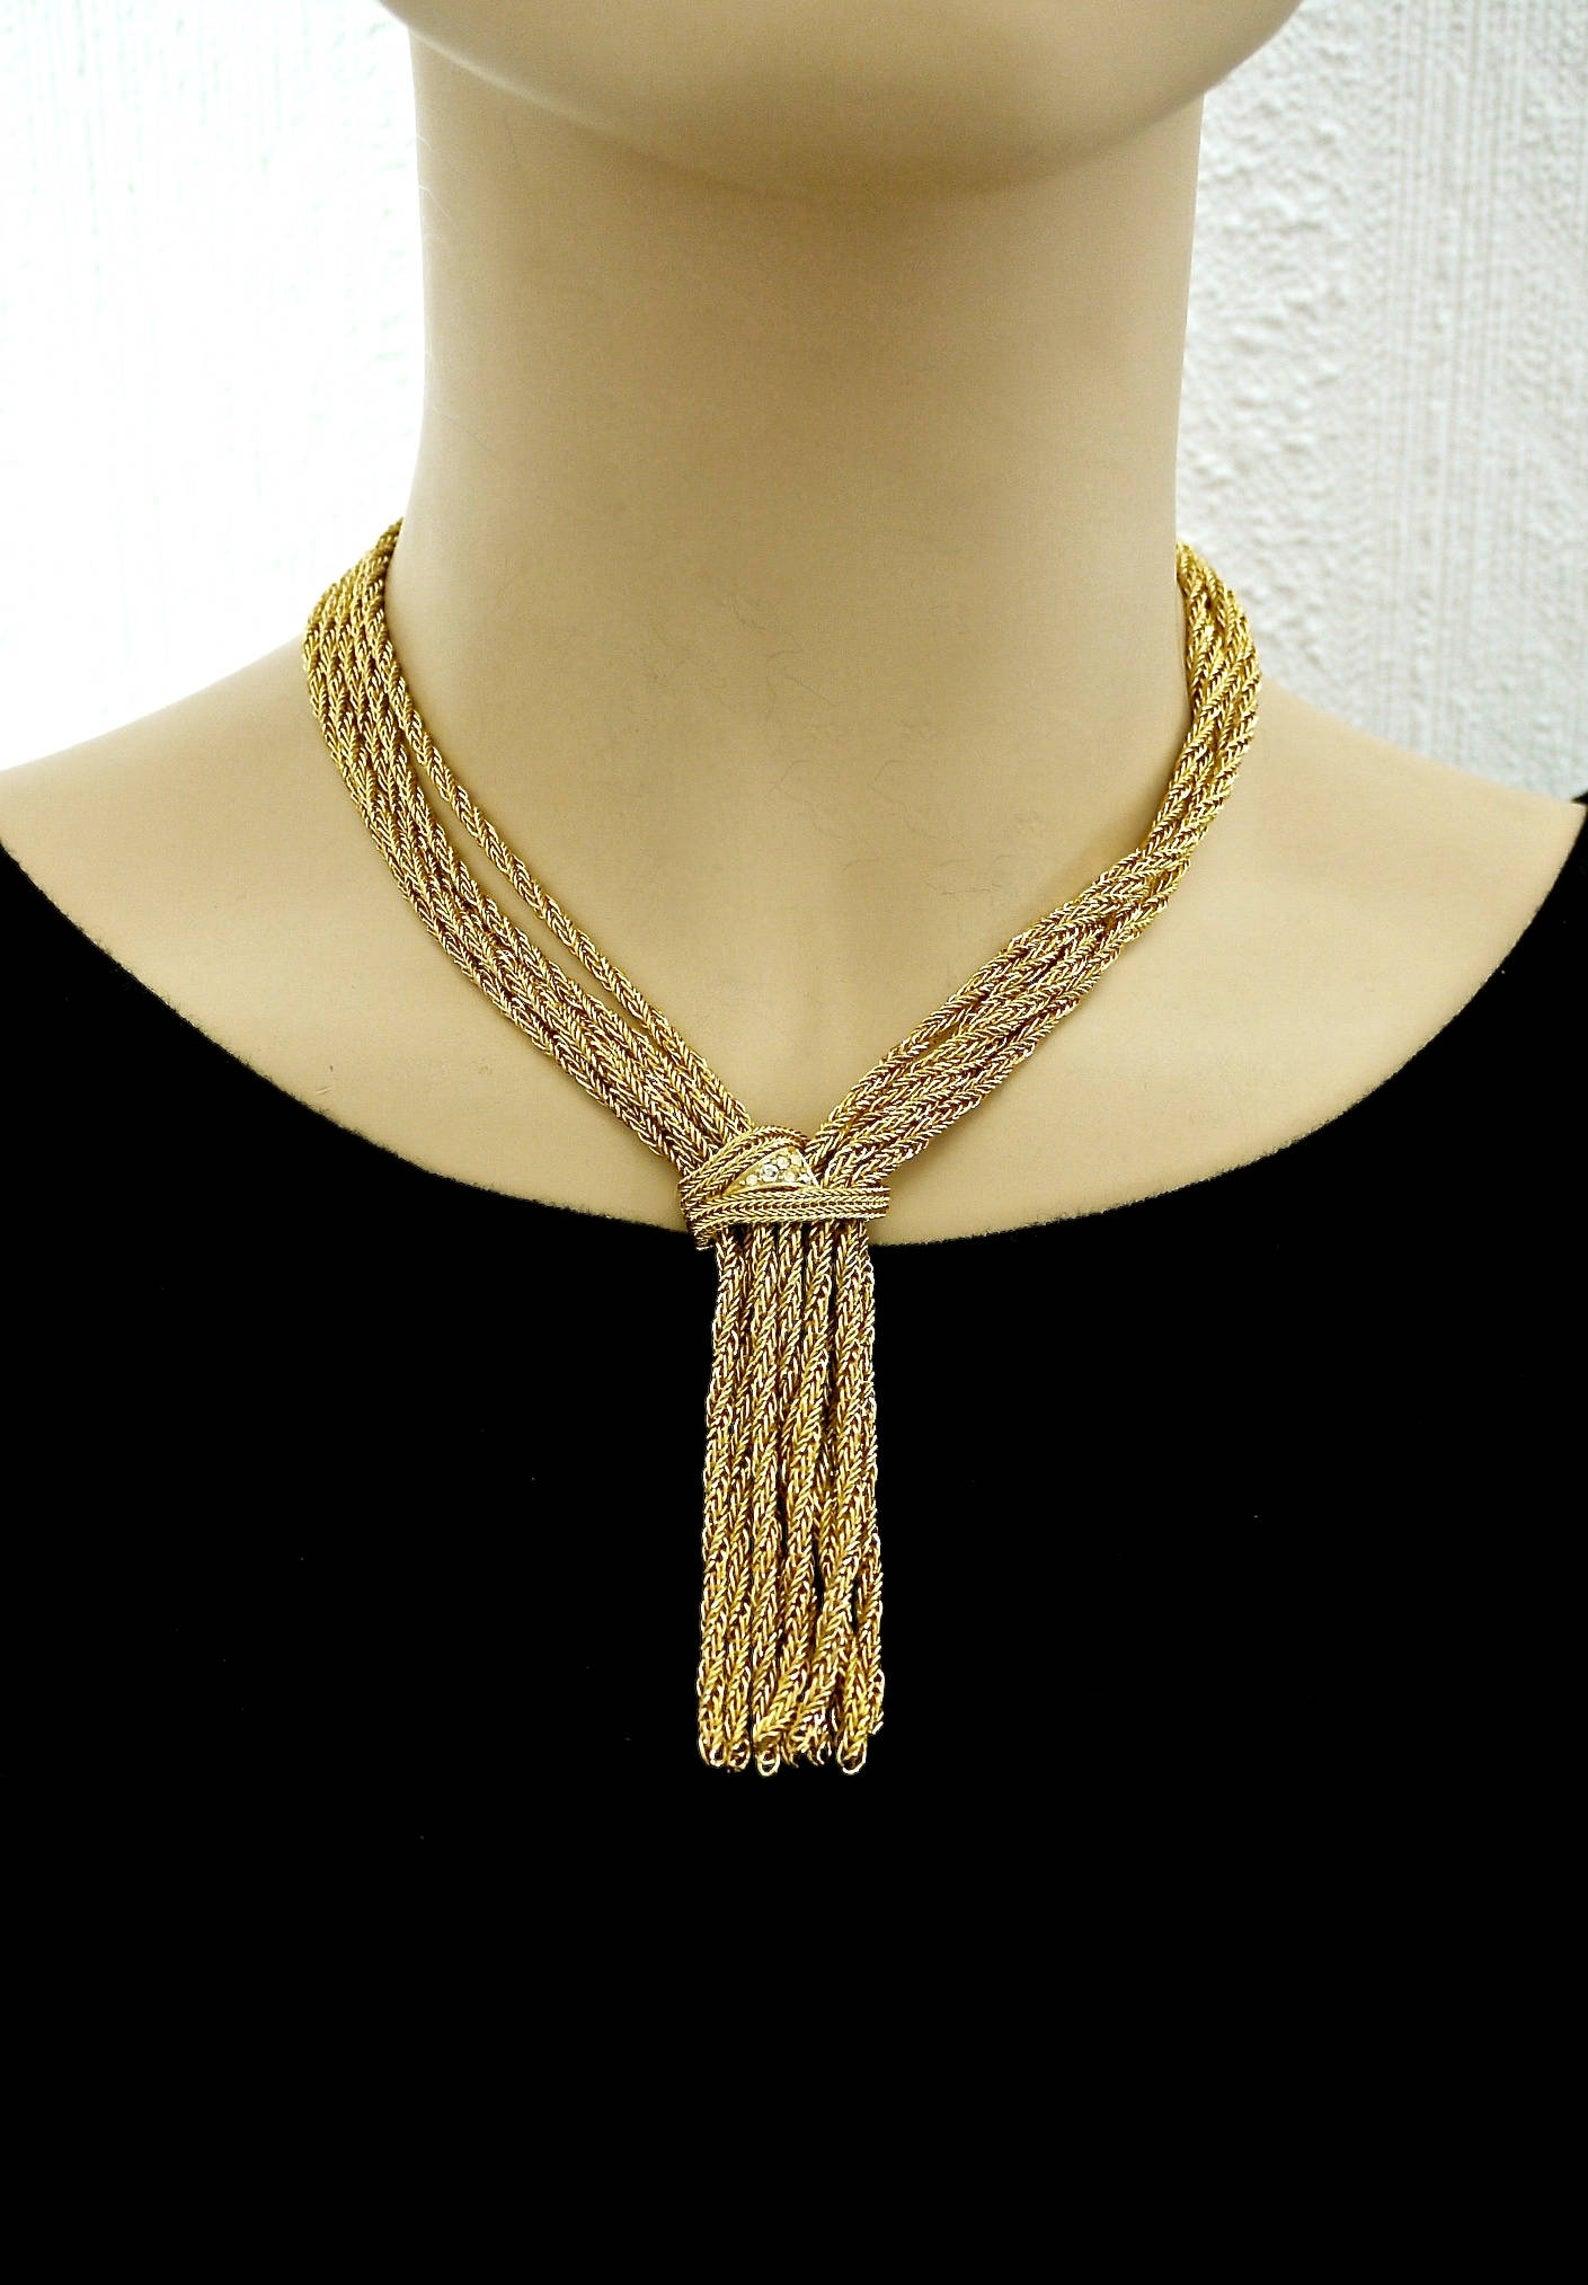 Vintage 1967 CHRISTIAN DIOR Cascading Multi Chain Rhinestone Tassel Necklace

Measurements:
Pendant Height: 3.35 inches (8.5 cm)
Wearable Length: 16.7 inches (42.5 cm)

Features:
- 100% Authentic CHRISTIAN DIOR.
- 5 twisted chains on each side